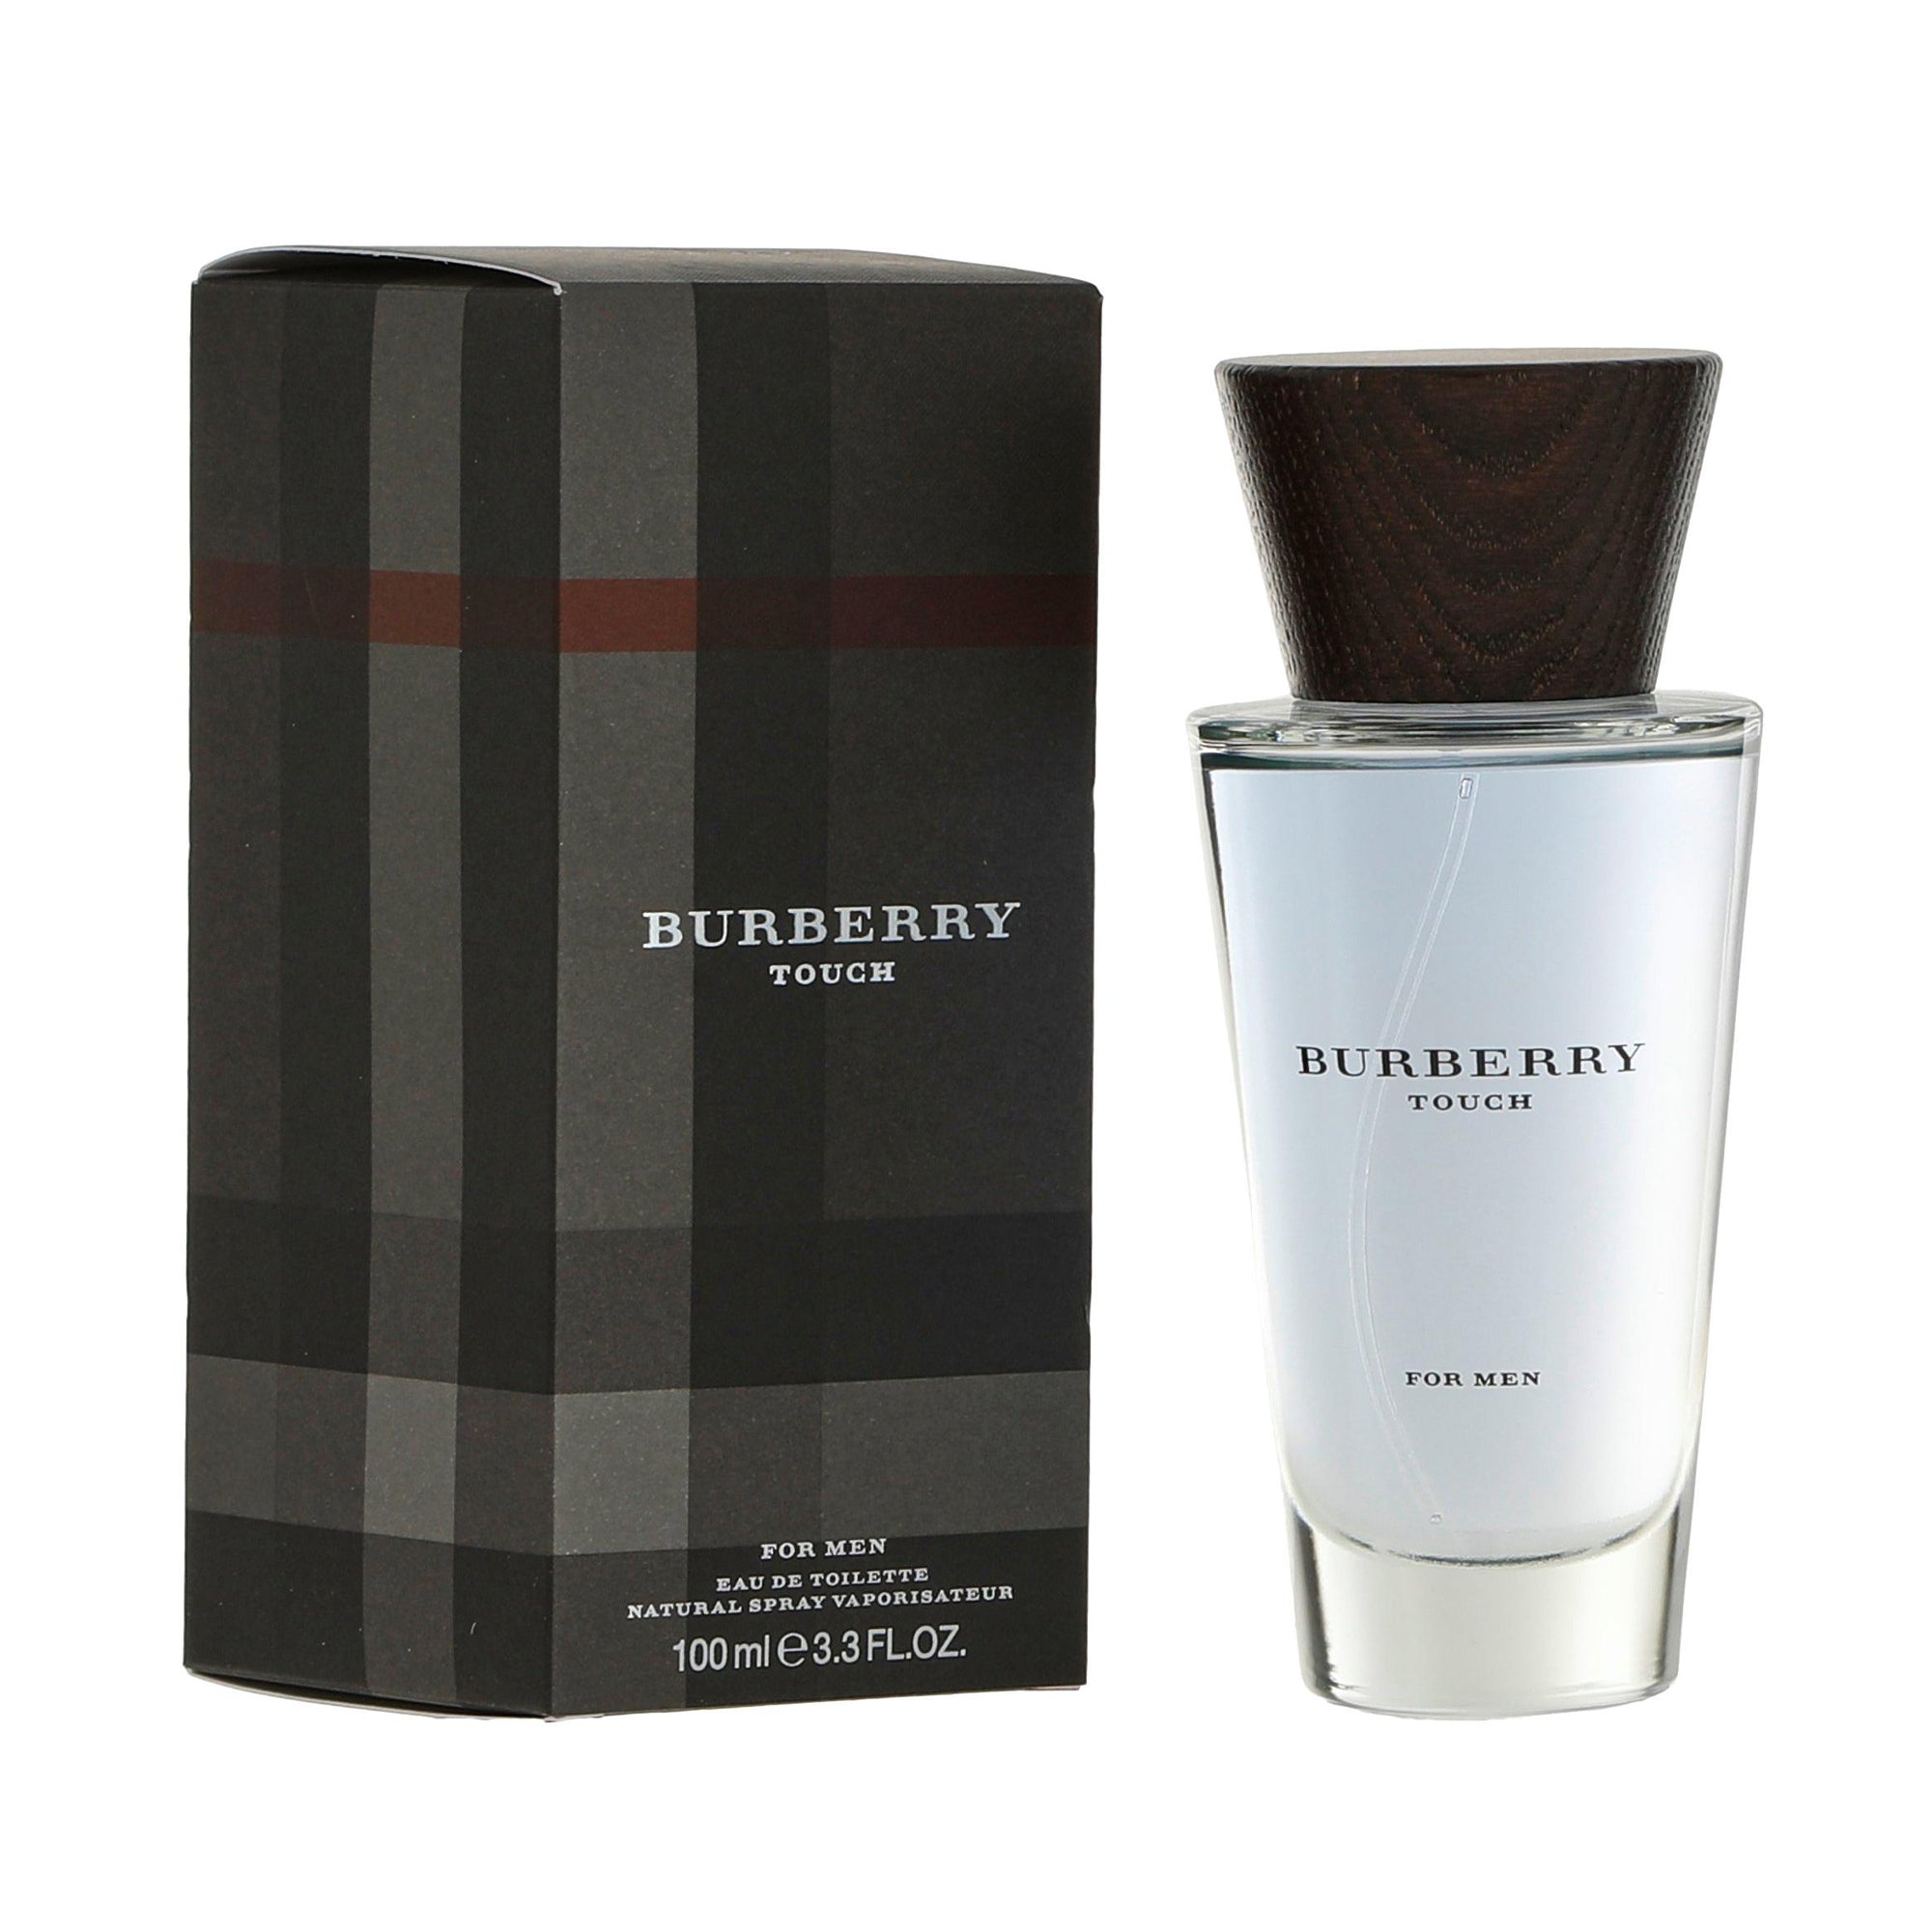 Burberry Touch for Men 3.3 oz